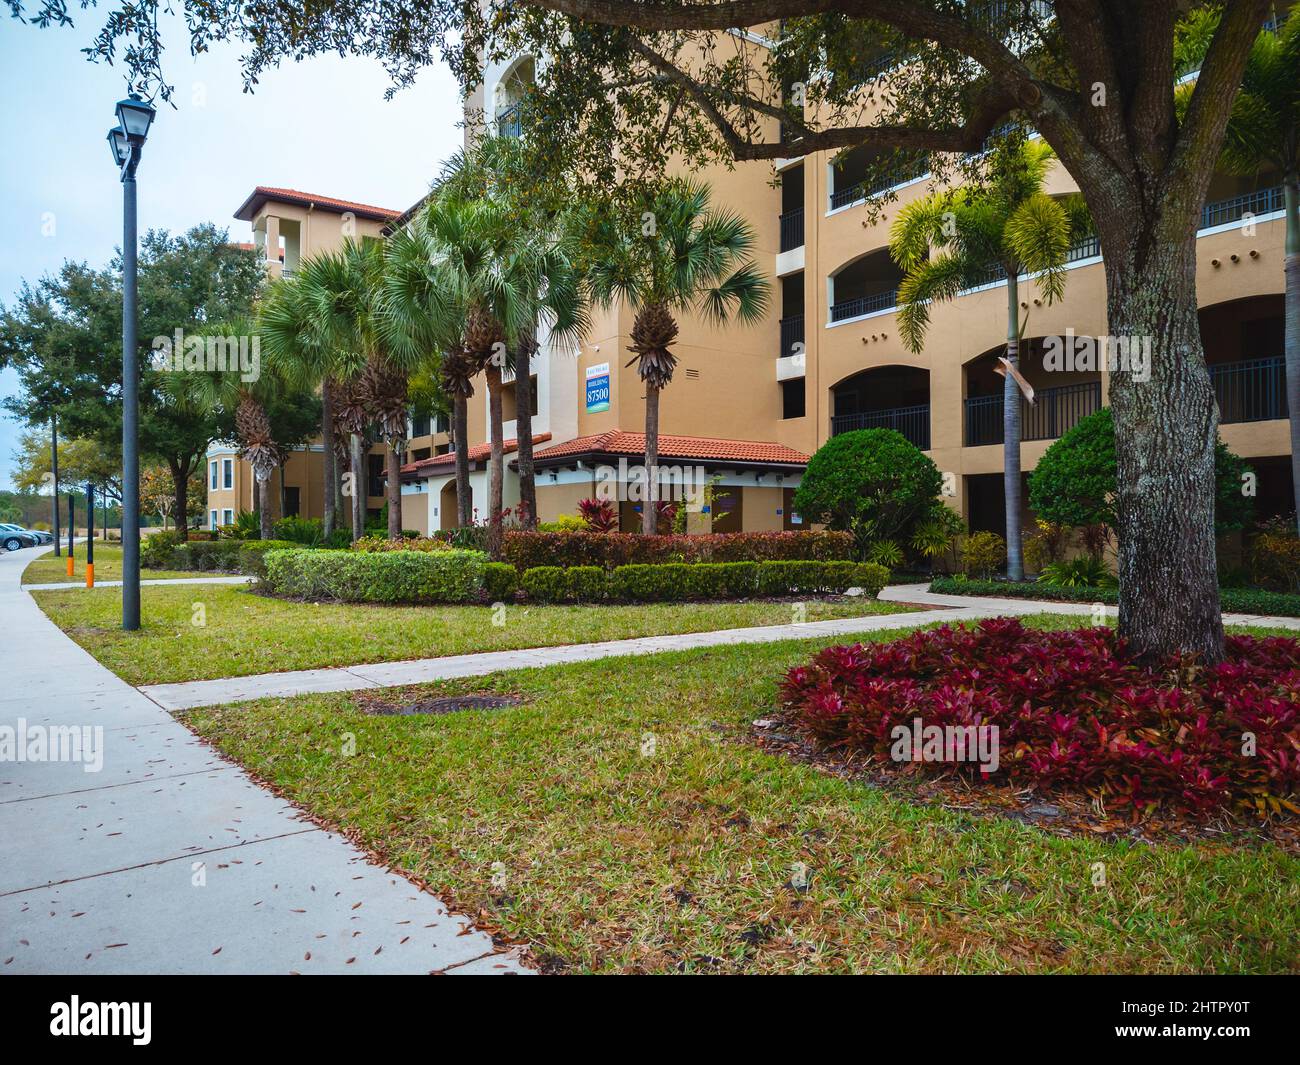 Kissimmee, Florida - February 6, 2022: Wide View of Apartment Building in Holiday Inn Resort. Stock Photo